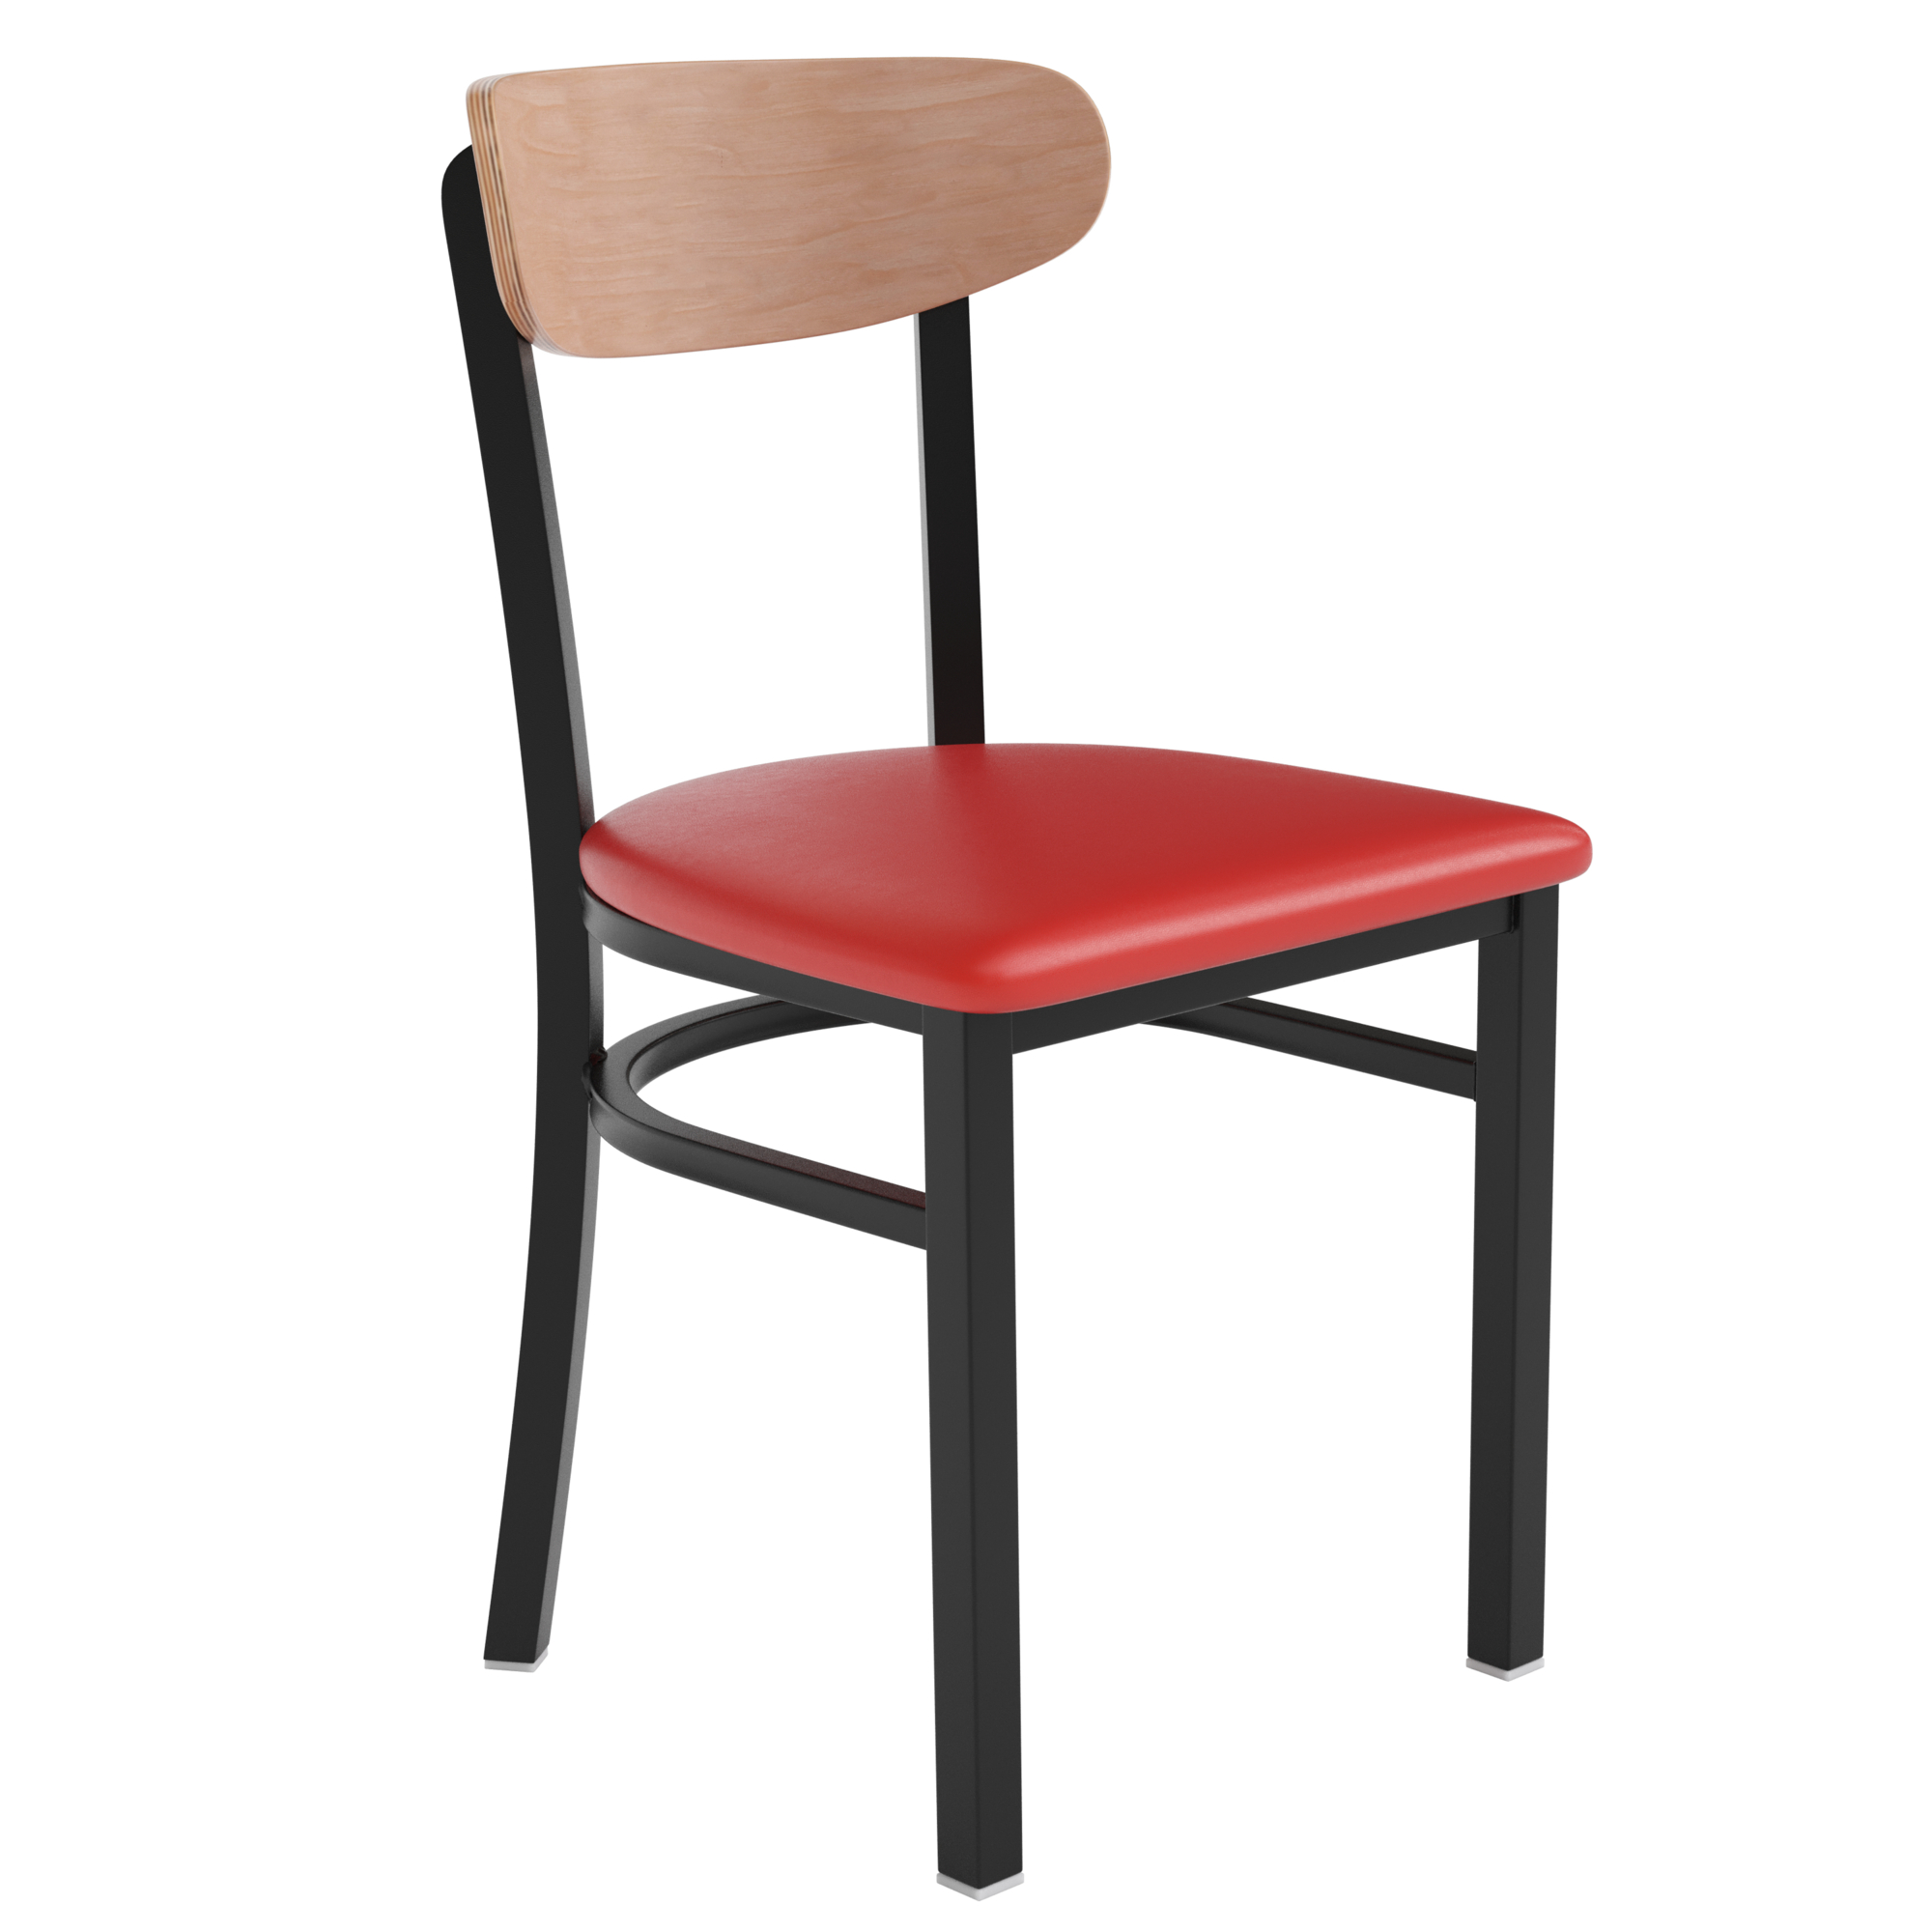 Flash Furniture, Red Vinyl Seat Dining Chair with Natural Wood Back, Primary Color Red, Included (qty.) 1, Model XUDG6V5RDVNAT